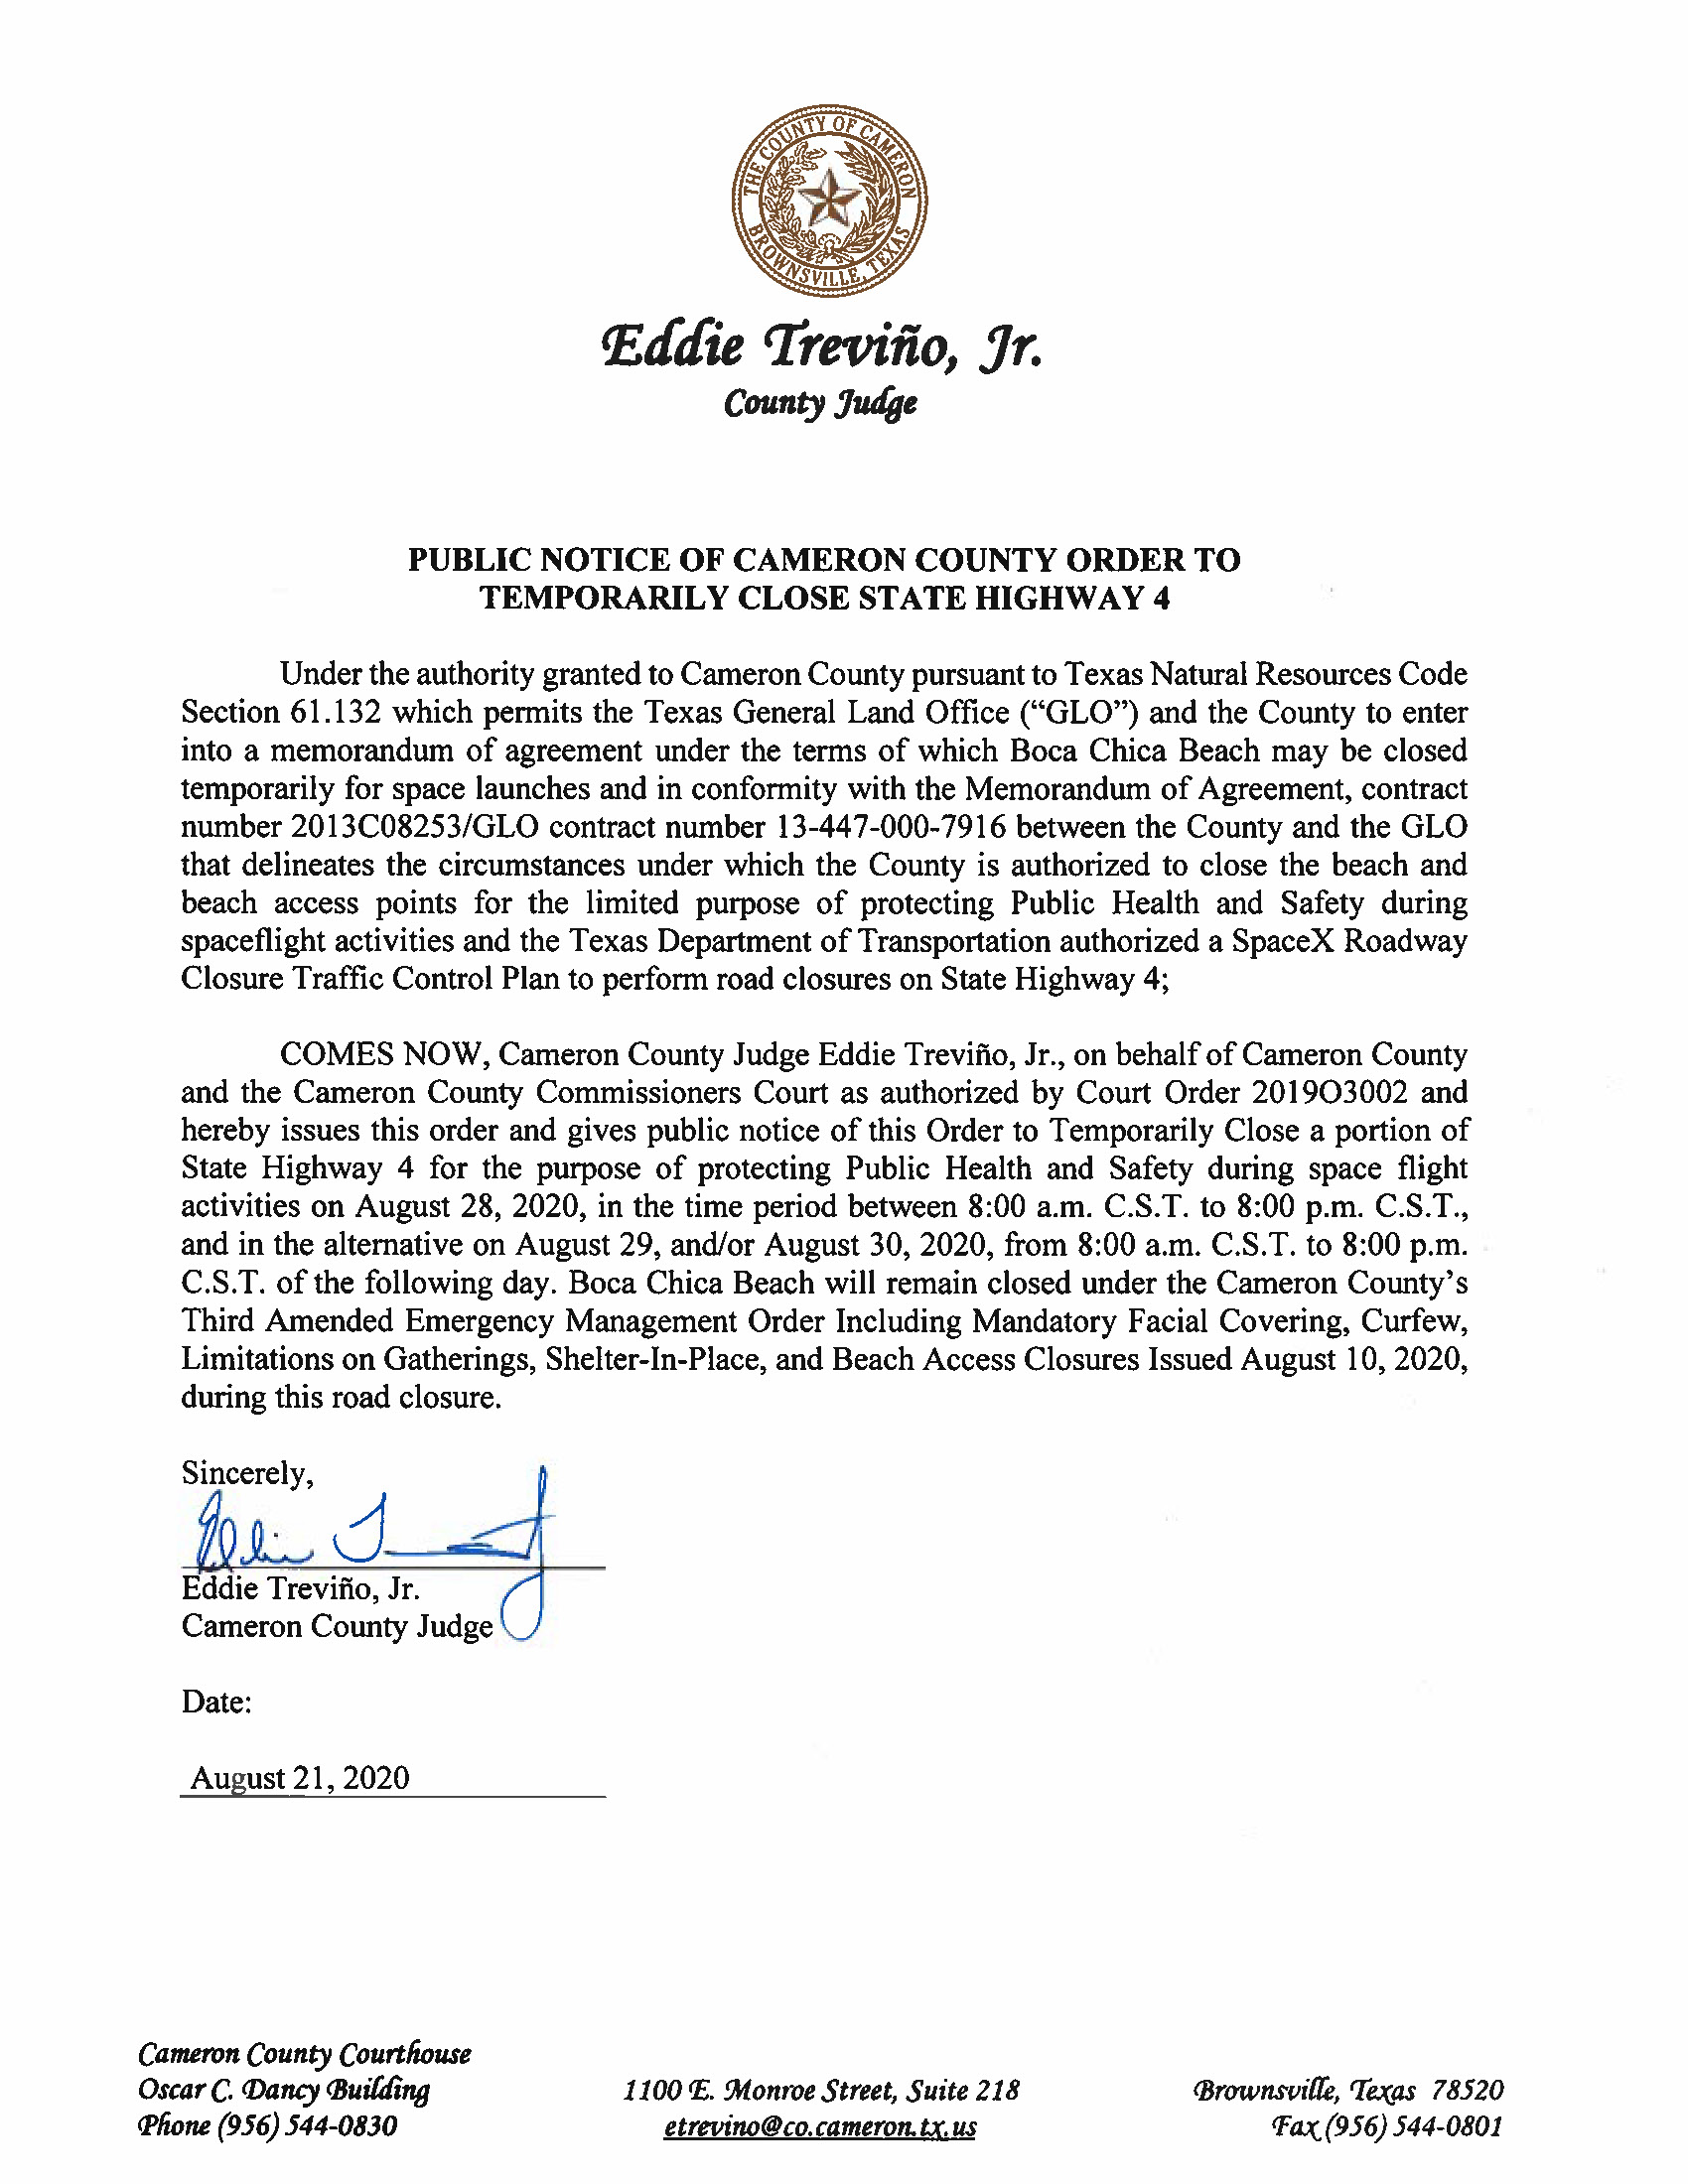 PUBLIC NOTICE OF CAMERON COUNTY ORDER TO TEMP. ROAD CLOSURE. 08.28.20.docx Page 1